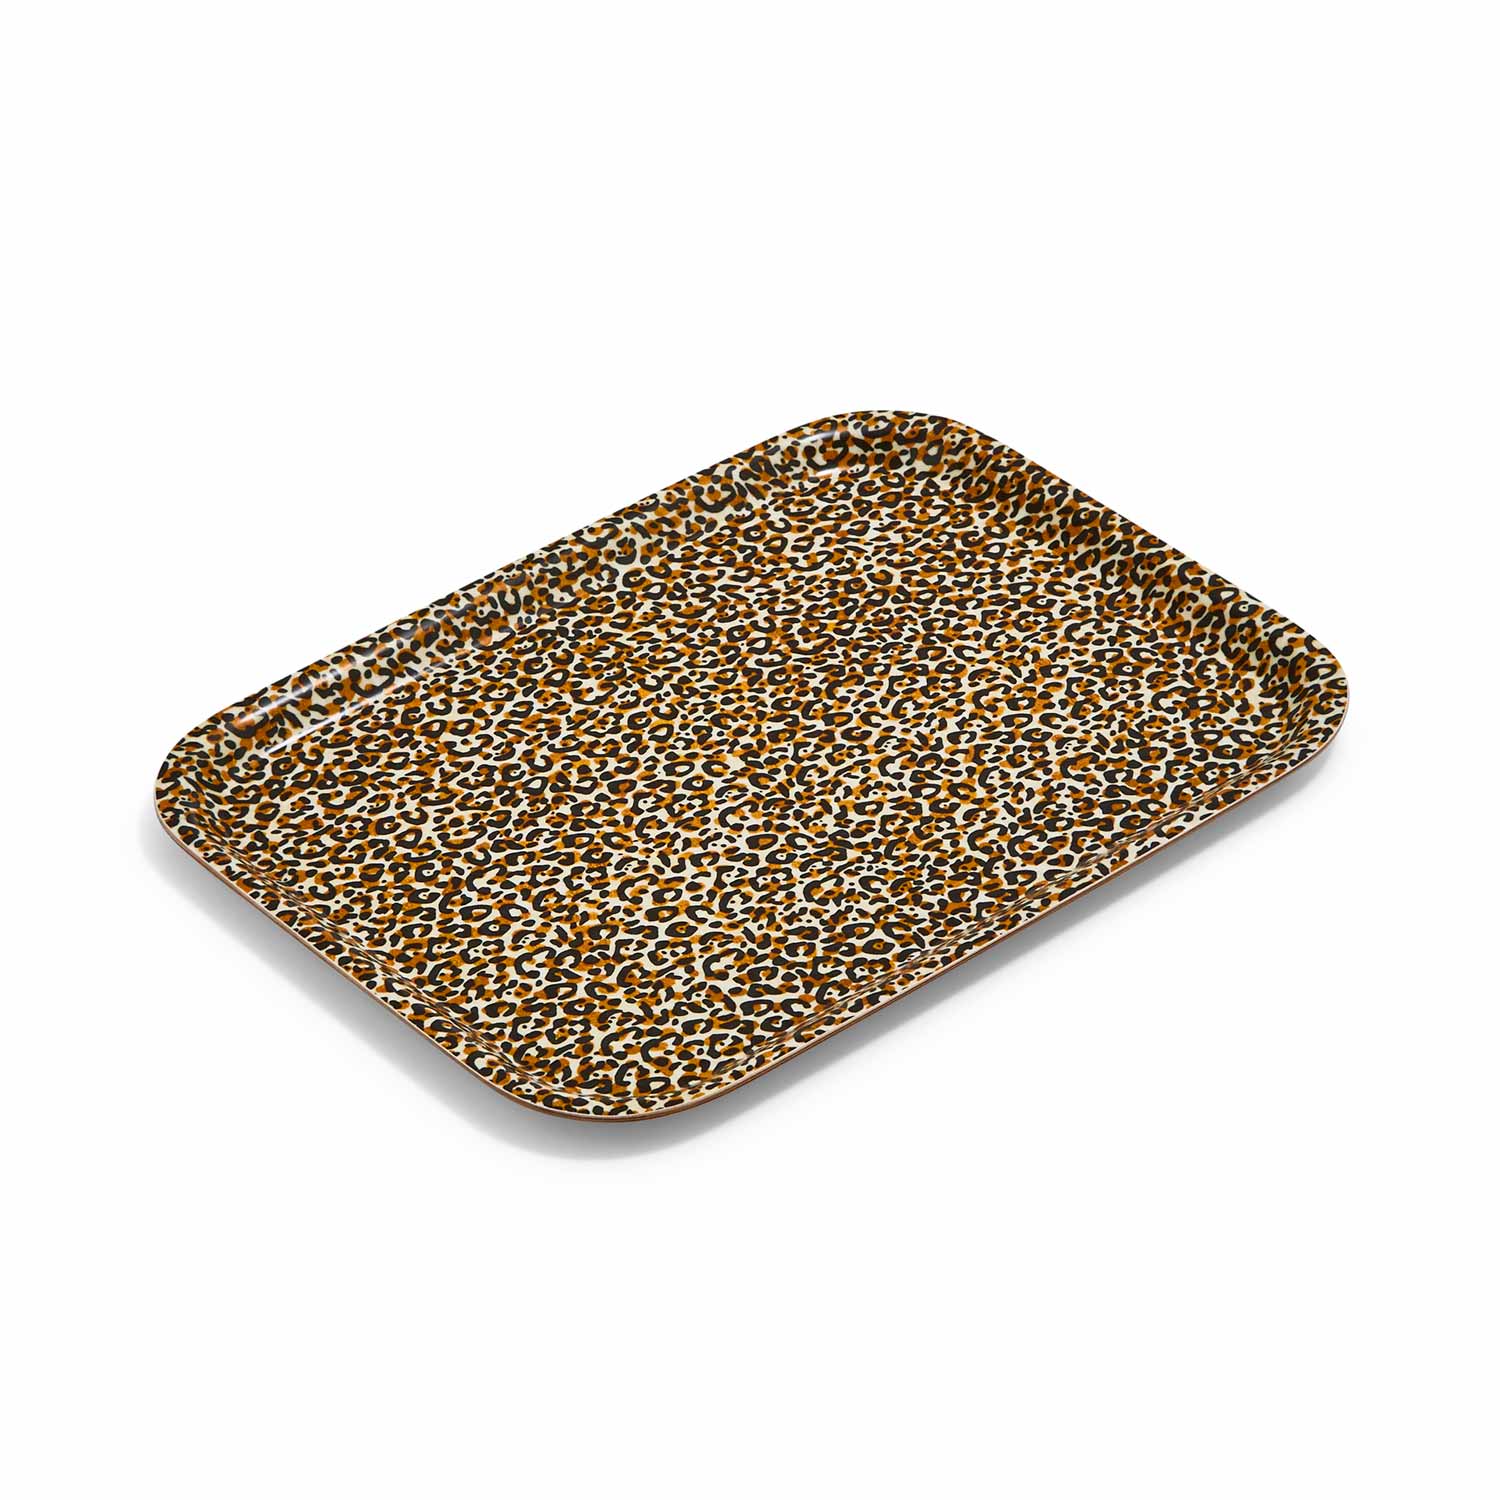 Creatures of Curiosity Leopard Print Tray image number null